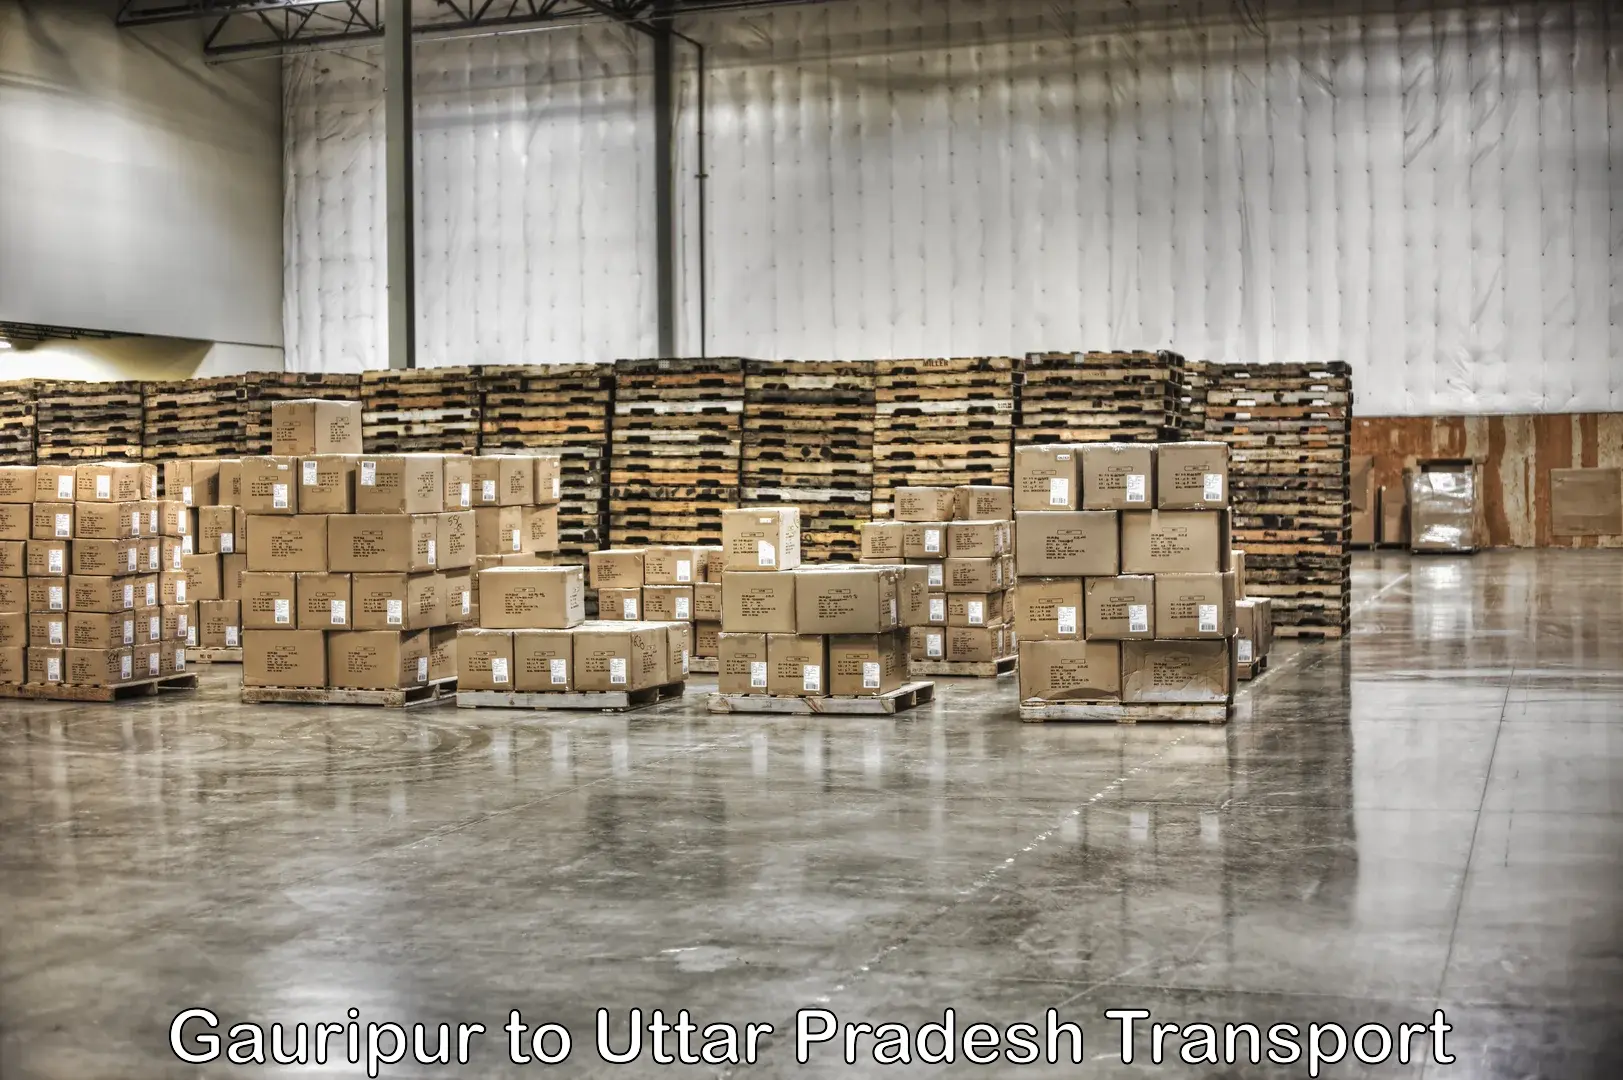 Truck transport companies in India in Gauripur to Sultanpur